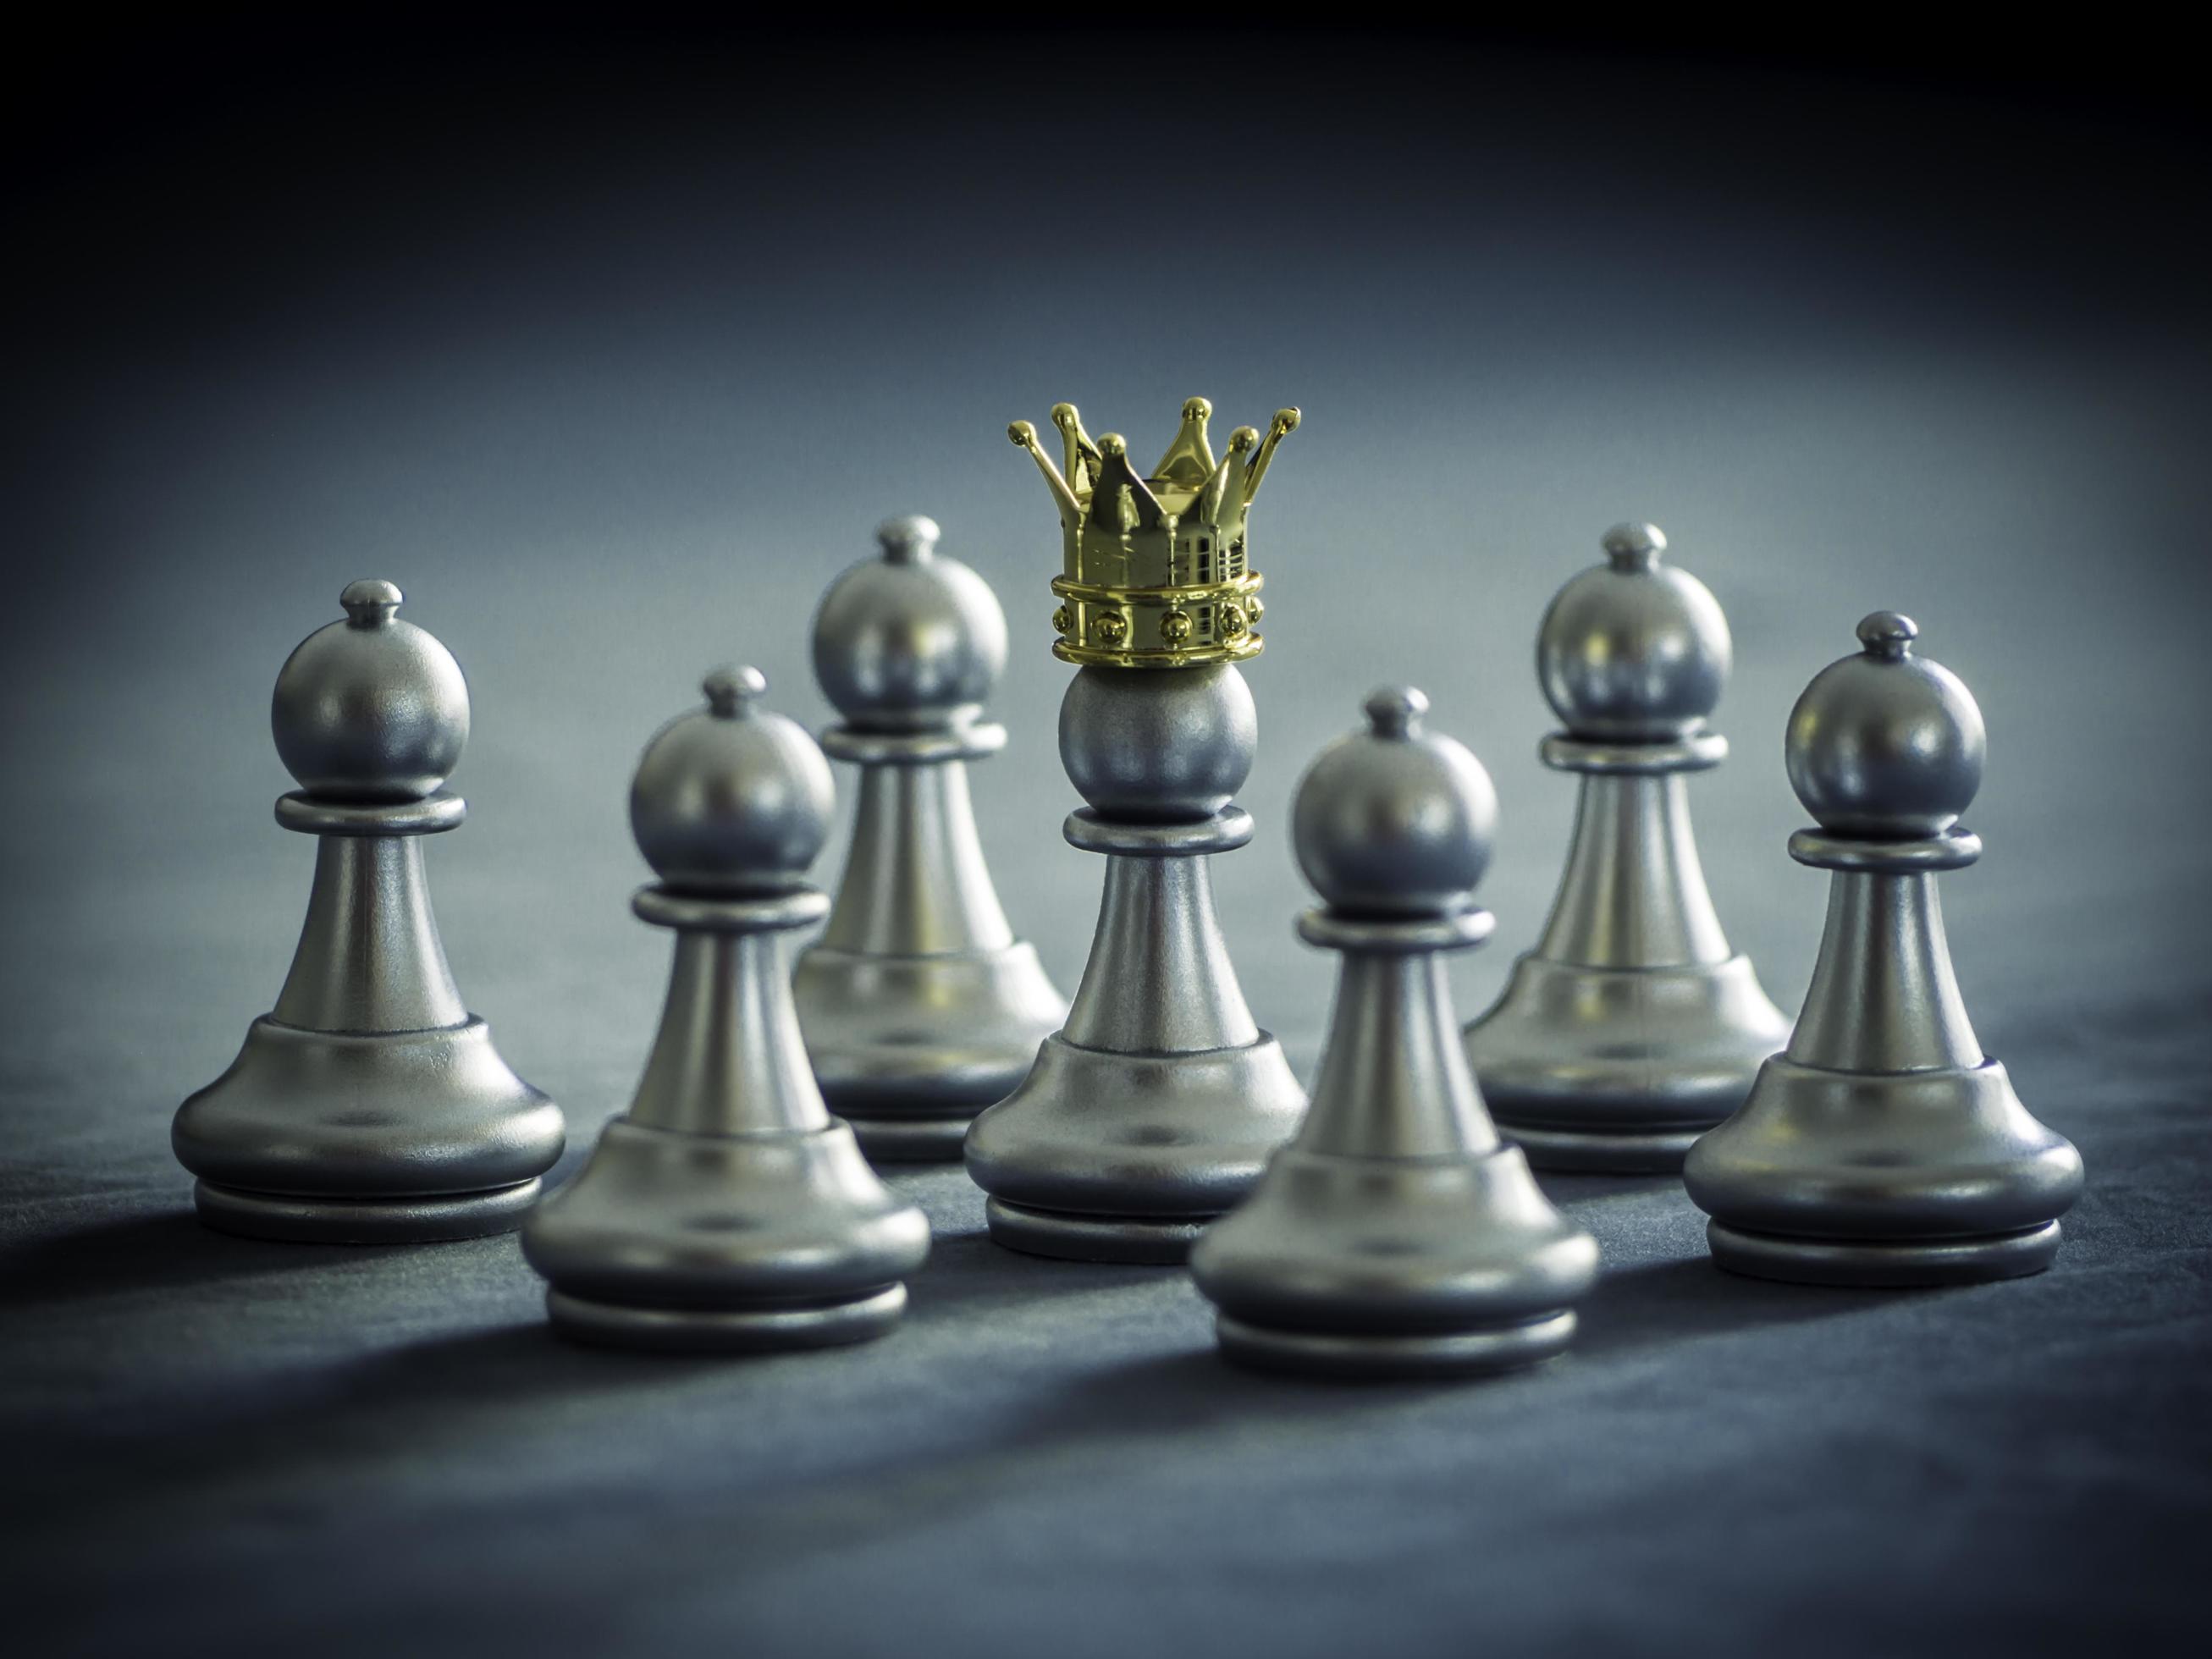 Silver chess pawn wear gold crown is surrounded by falling around silver chess pieces to fighting with teamwork to victory, business strategy concept and leader and teamwork concept for success. 7132972 Stock